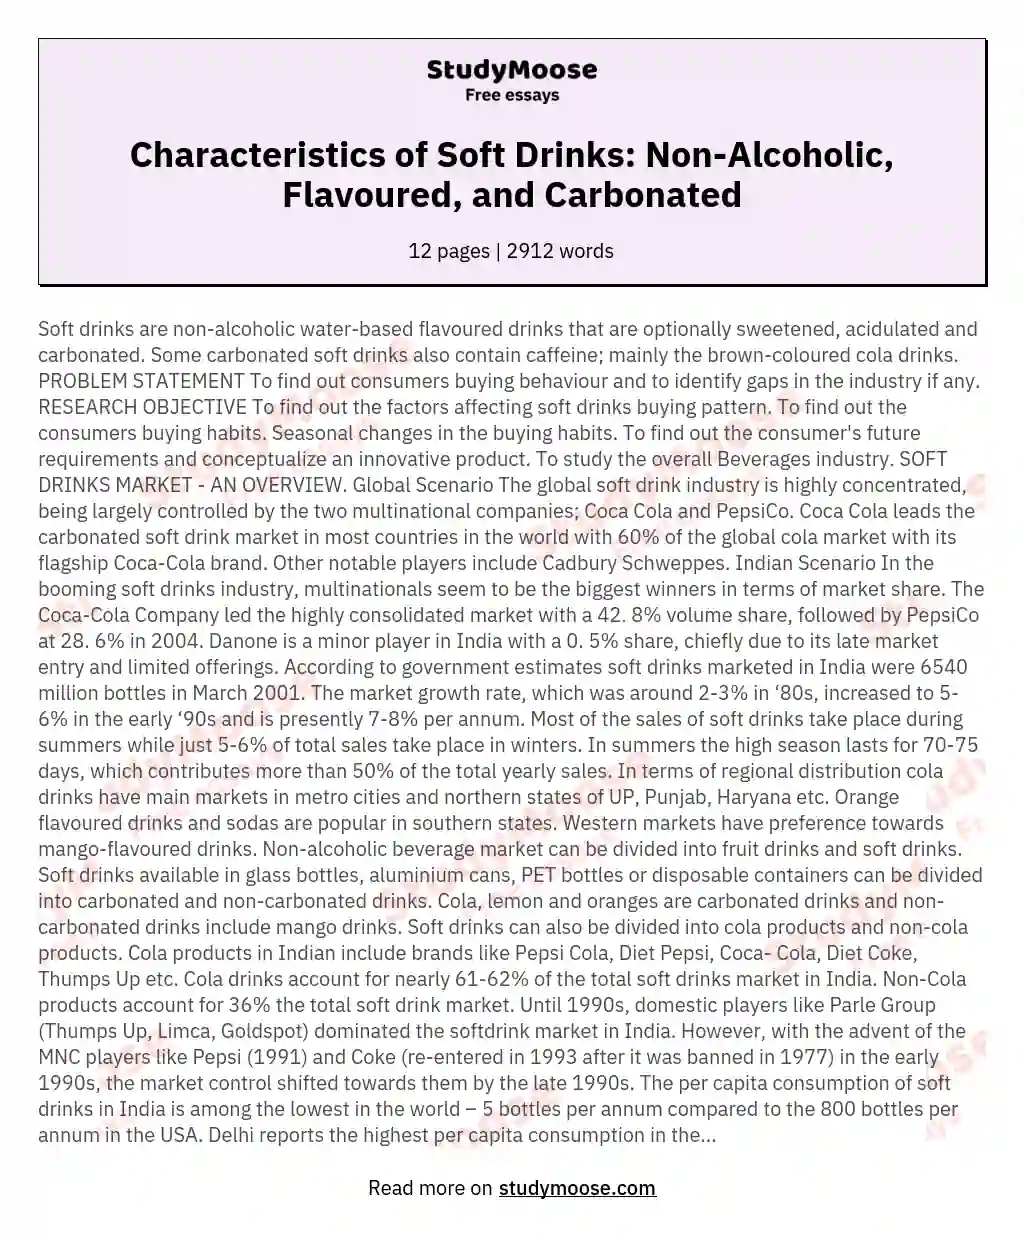 Characteristics of Soft Drinks: Non-Alcoholic, Flavoured, and Carbonated essay